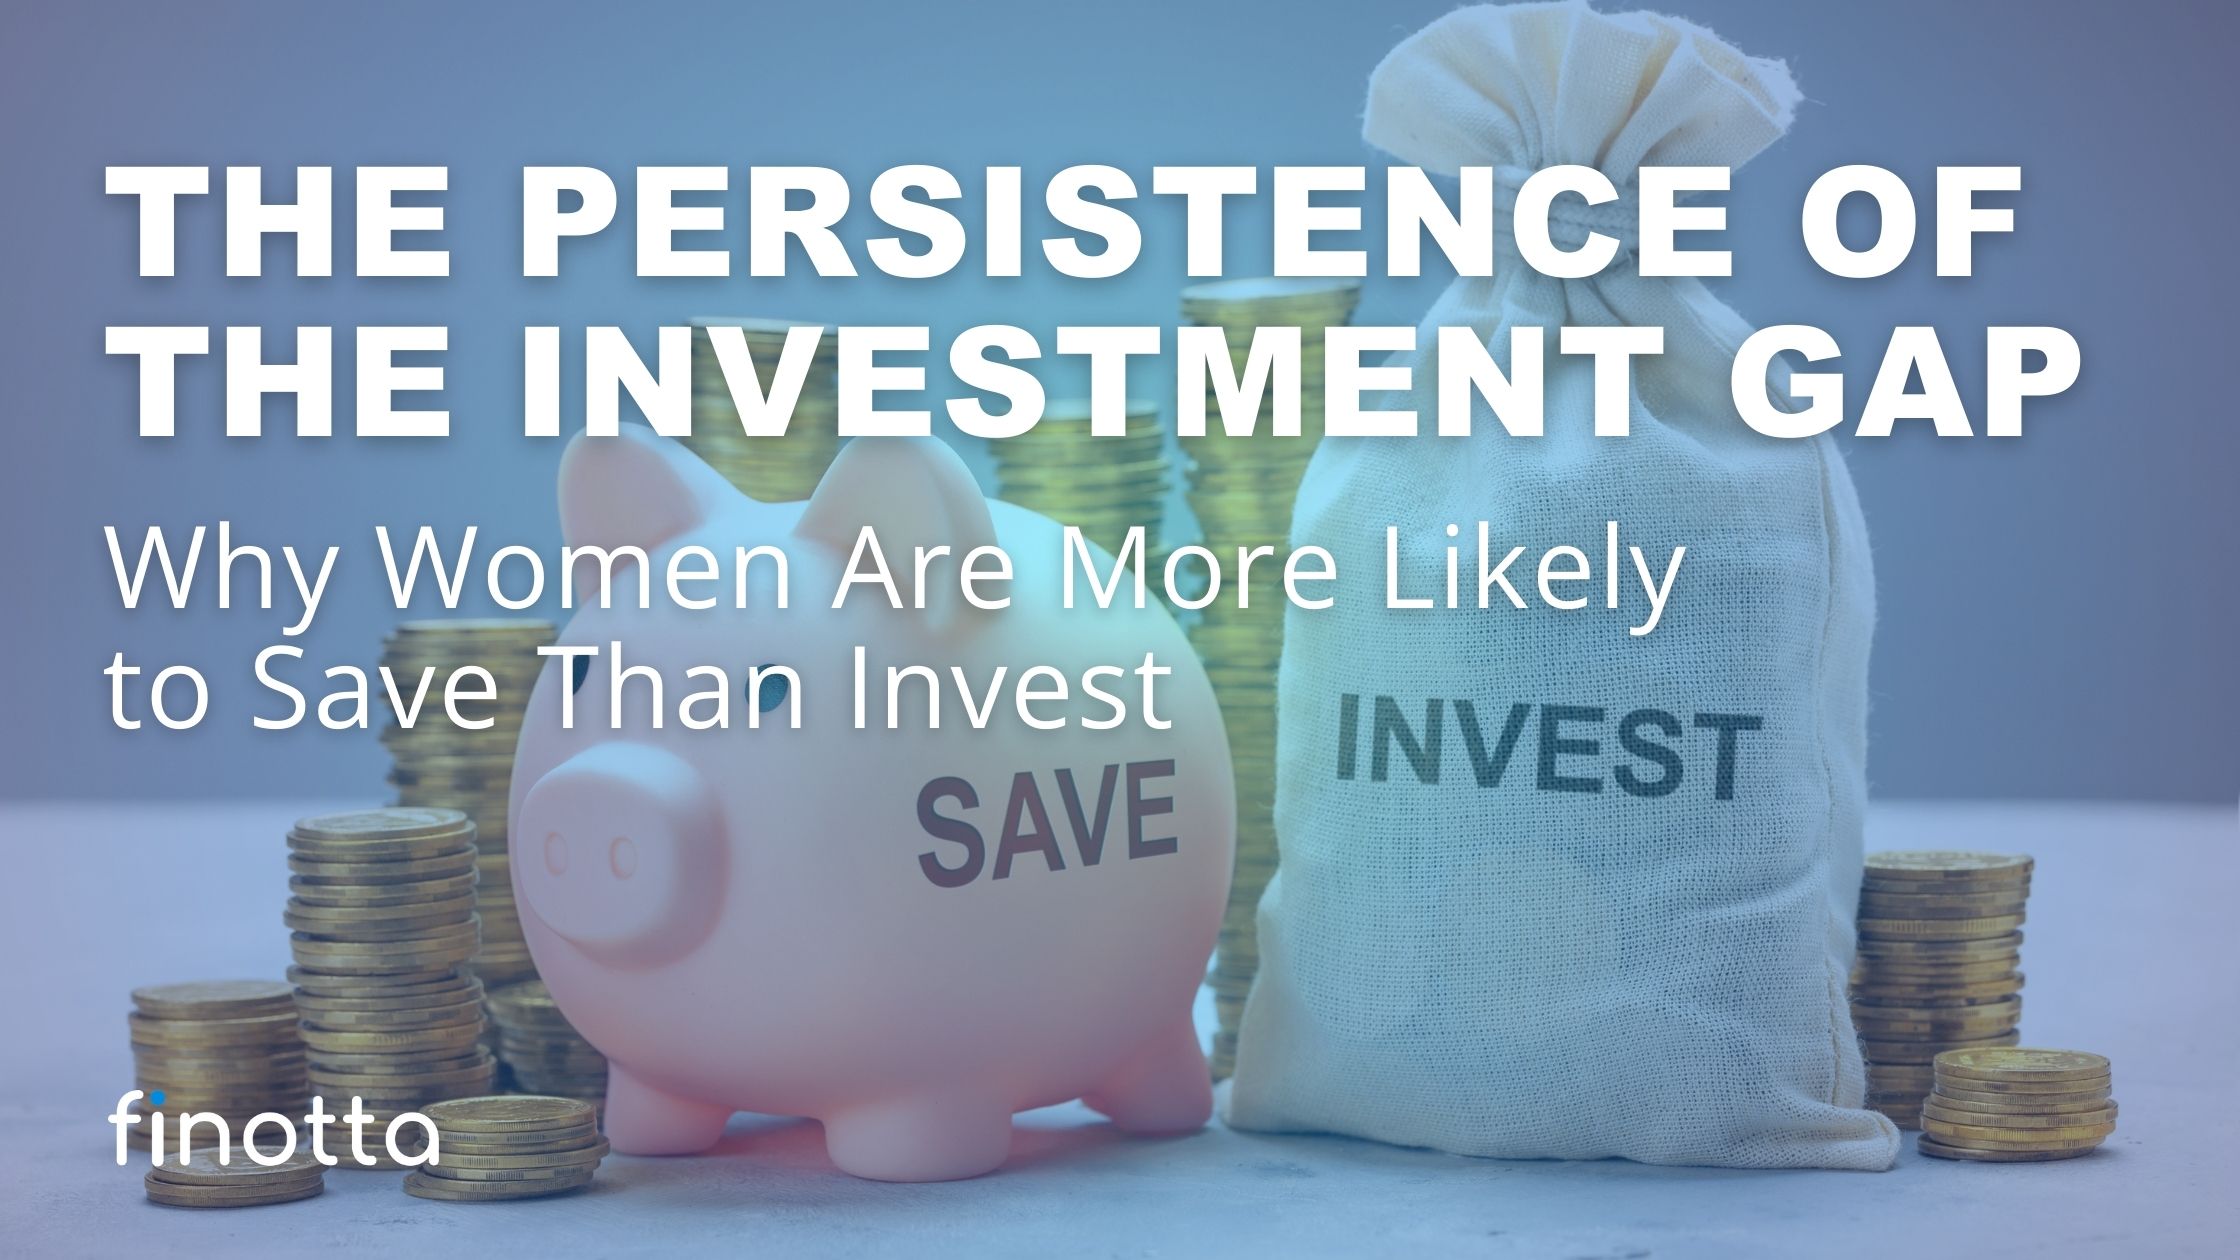 The Persistence of the Investment Gap: Why Women Are More Likely to Save Than Invest